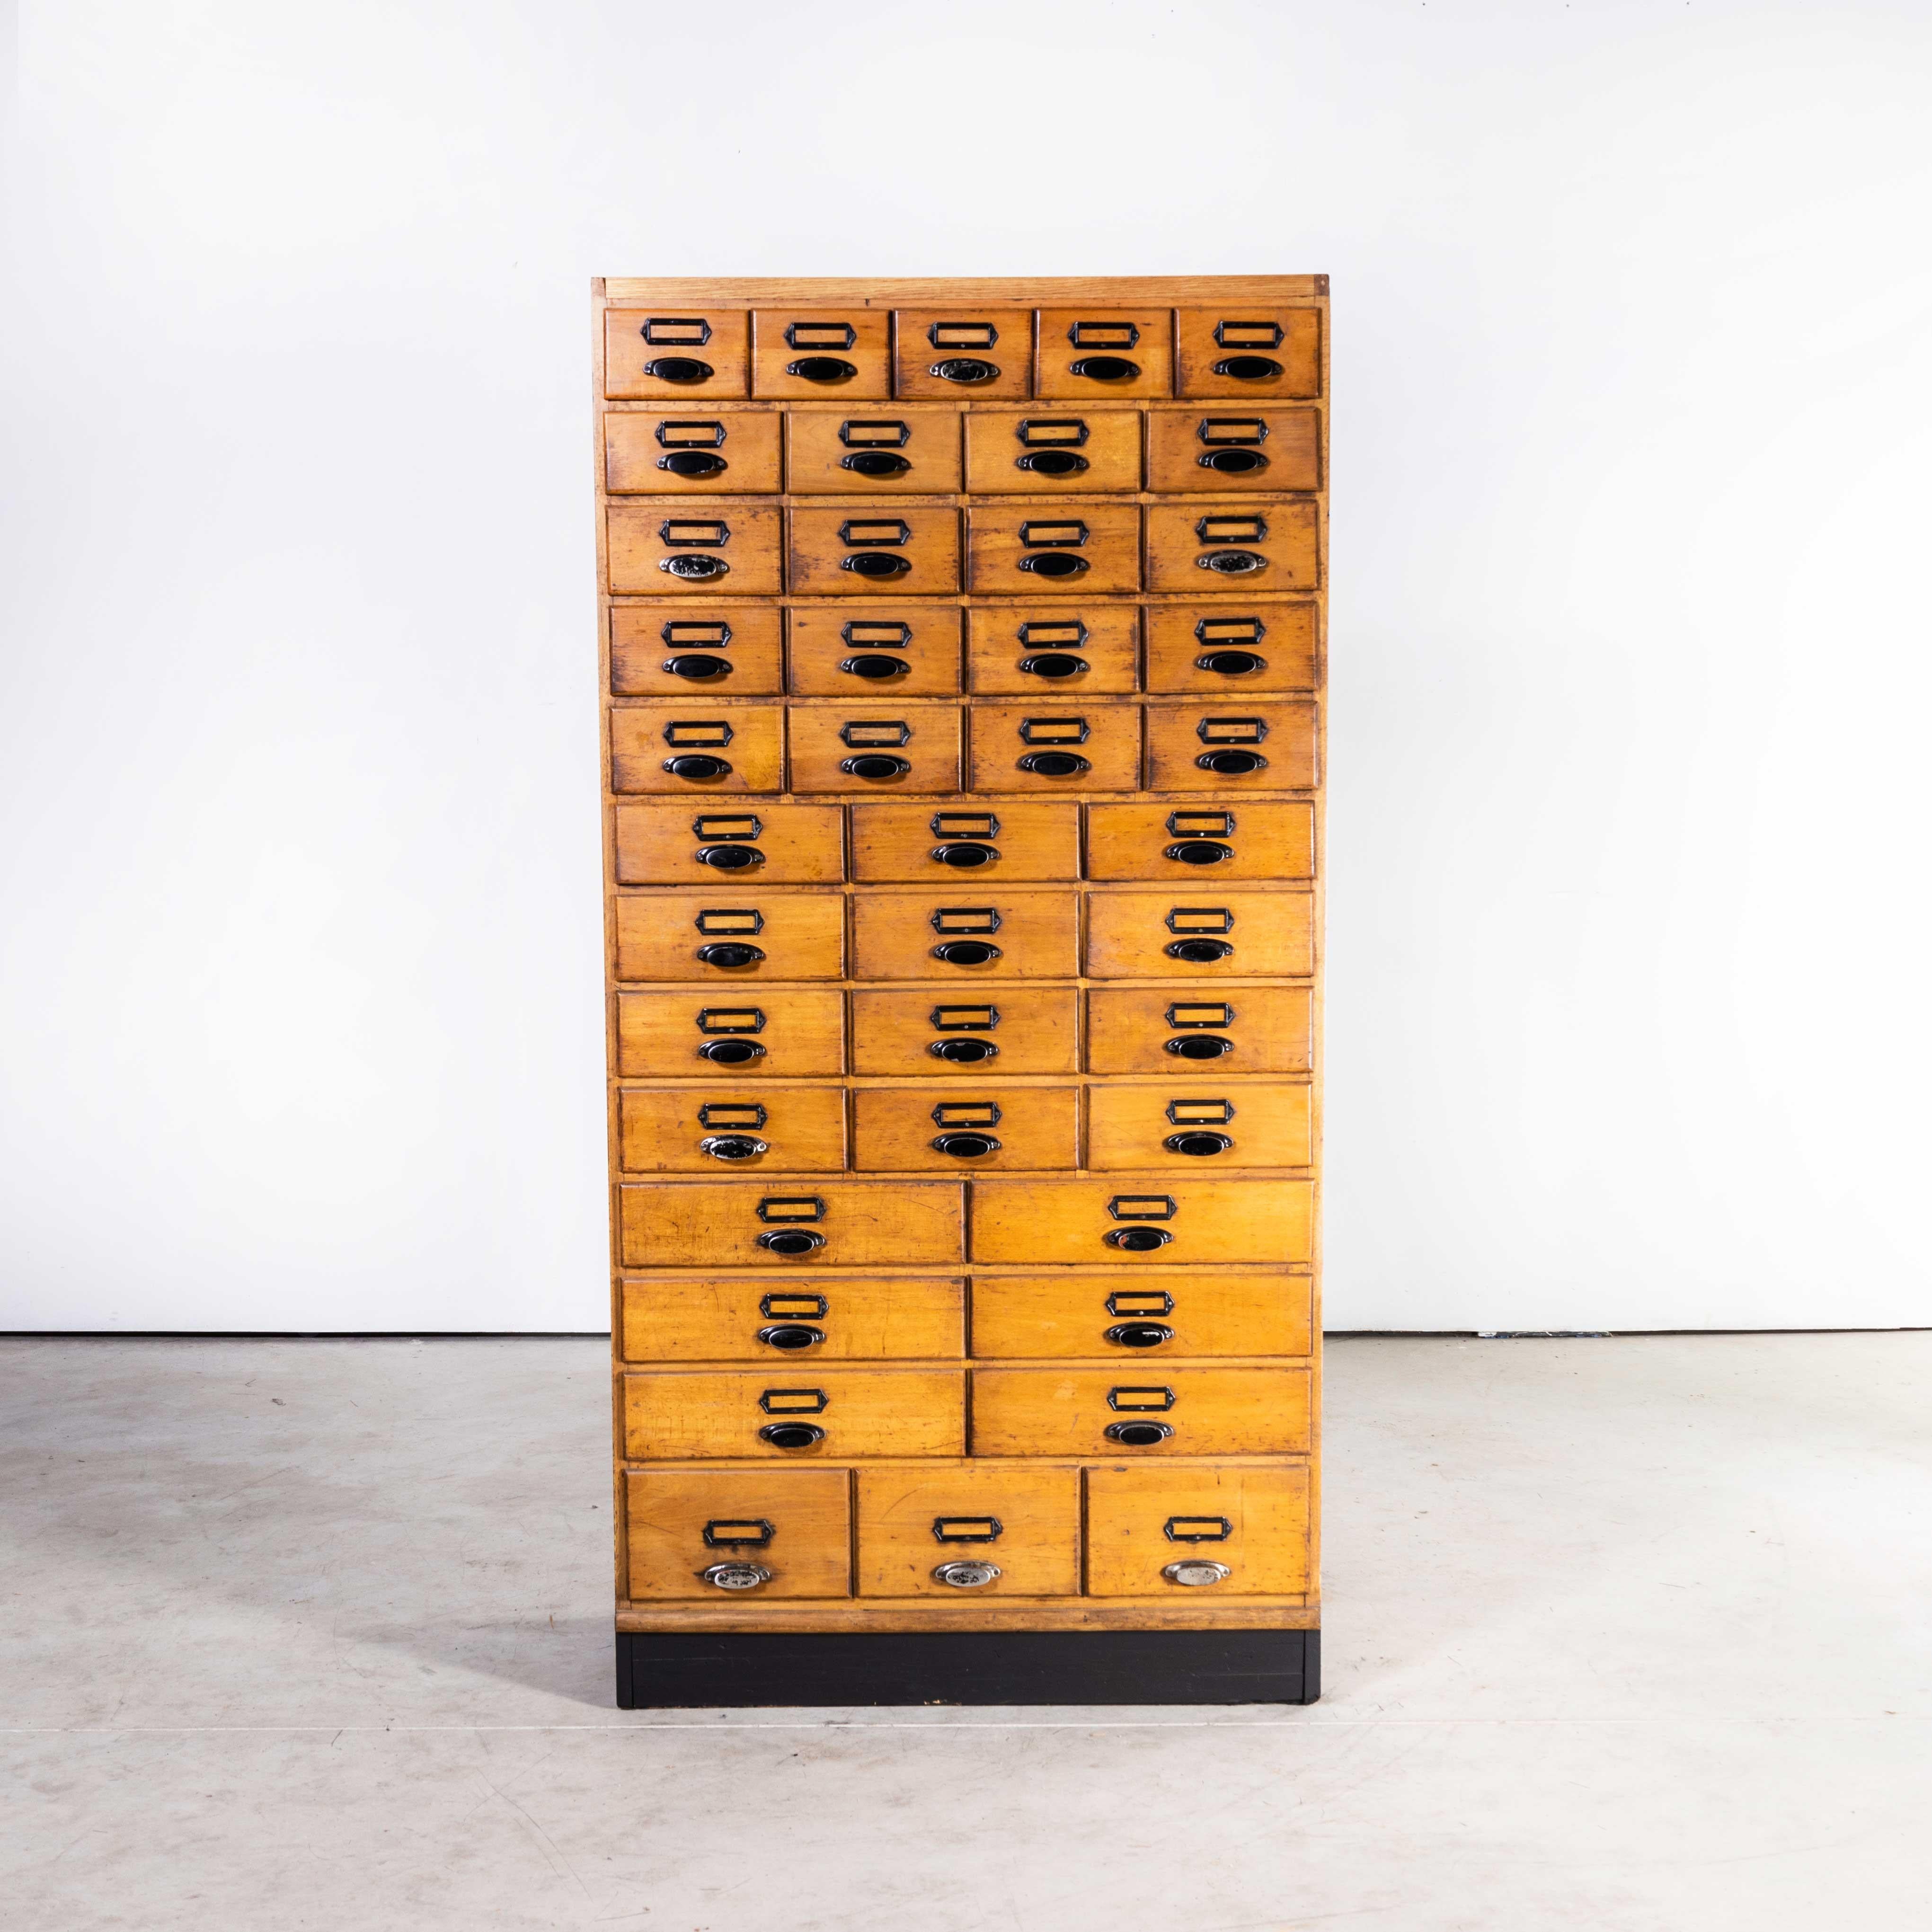 1950’s Tall printers workshop bank of drawers – forty two drawers
1950’s Tall printers workshop bank of drawers – forty two drawers. Beautifully made in solid beech throughout this is a high quality bank of drawers originally from a printers